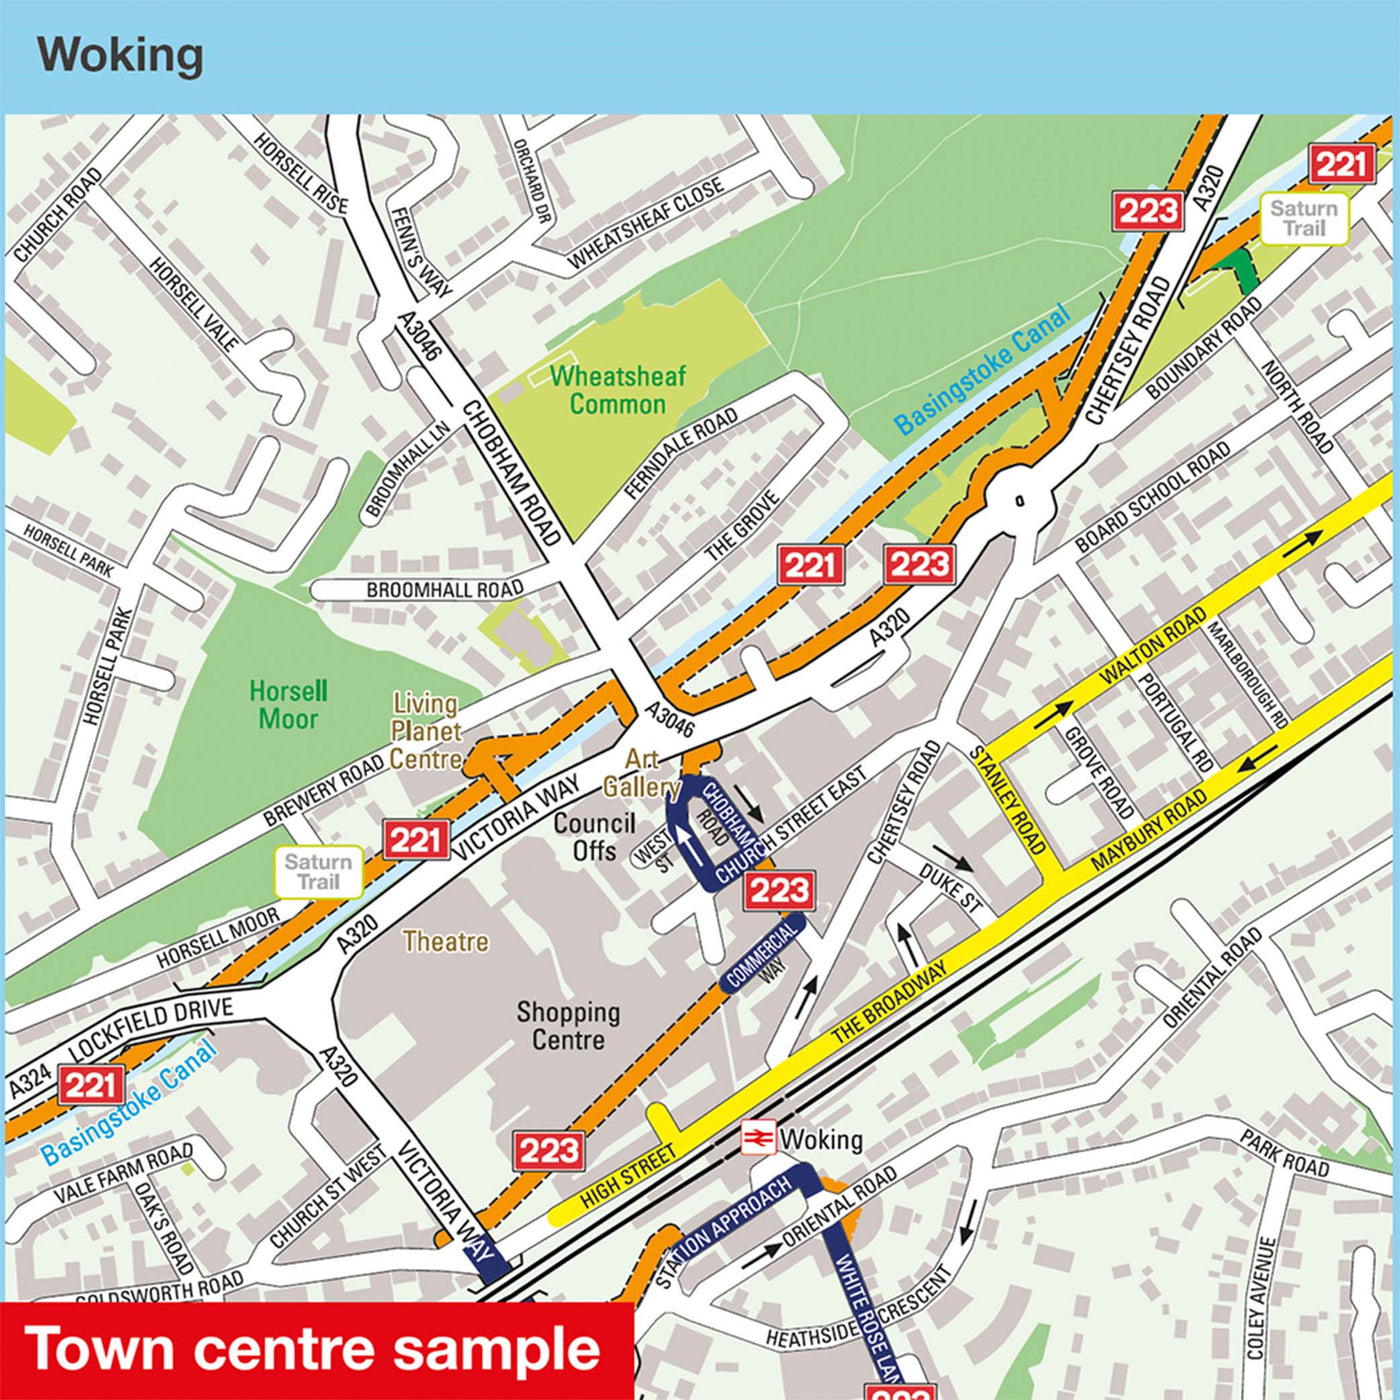 Town centre sample: Woking, featuring routes 221 and 223